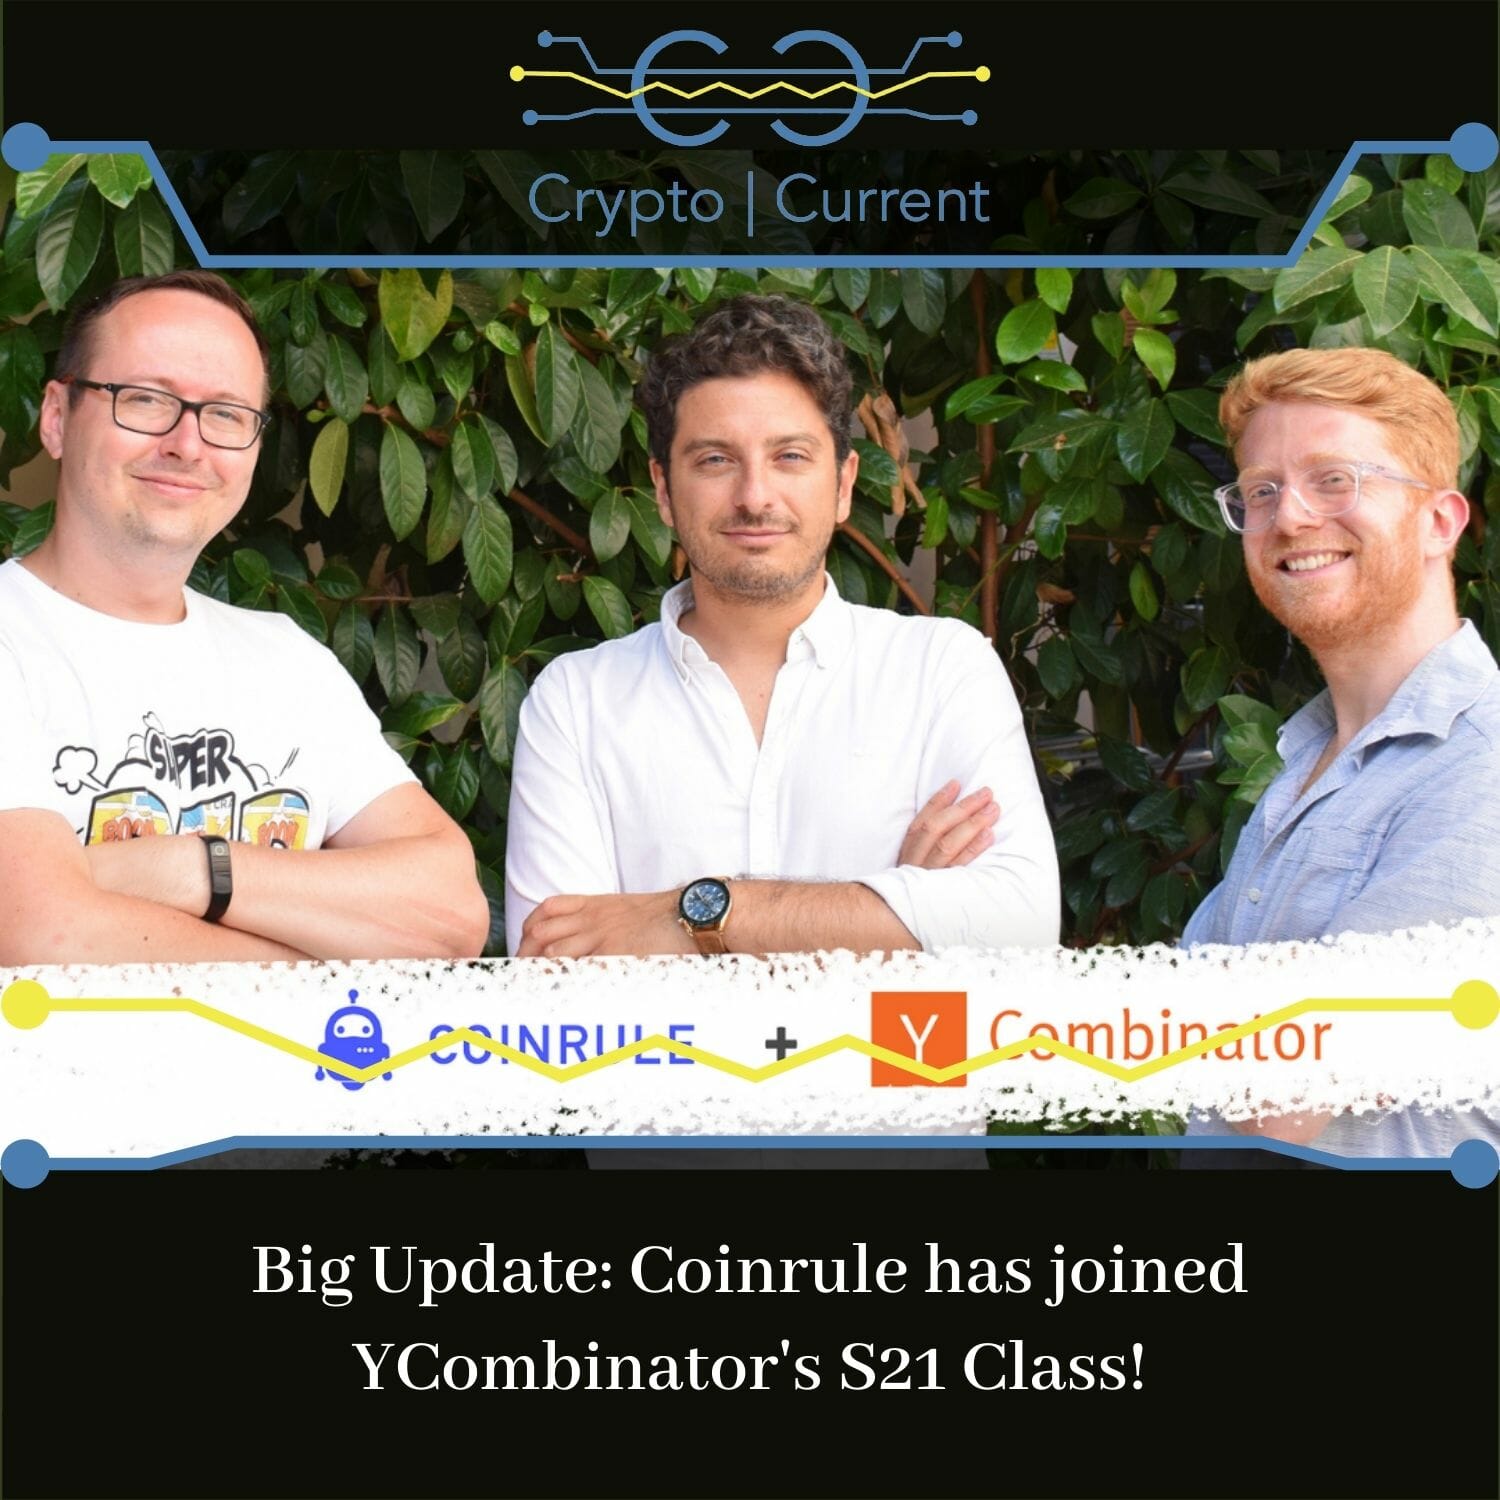 Big Update Coinrule has joined YCombinator's S21 Class!